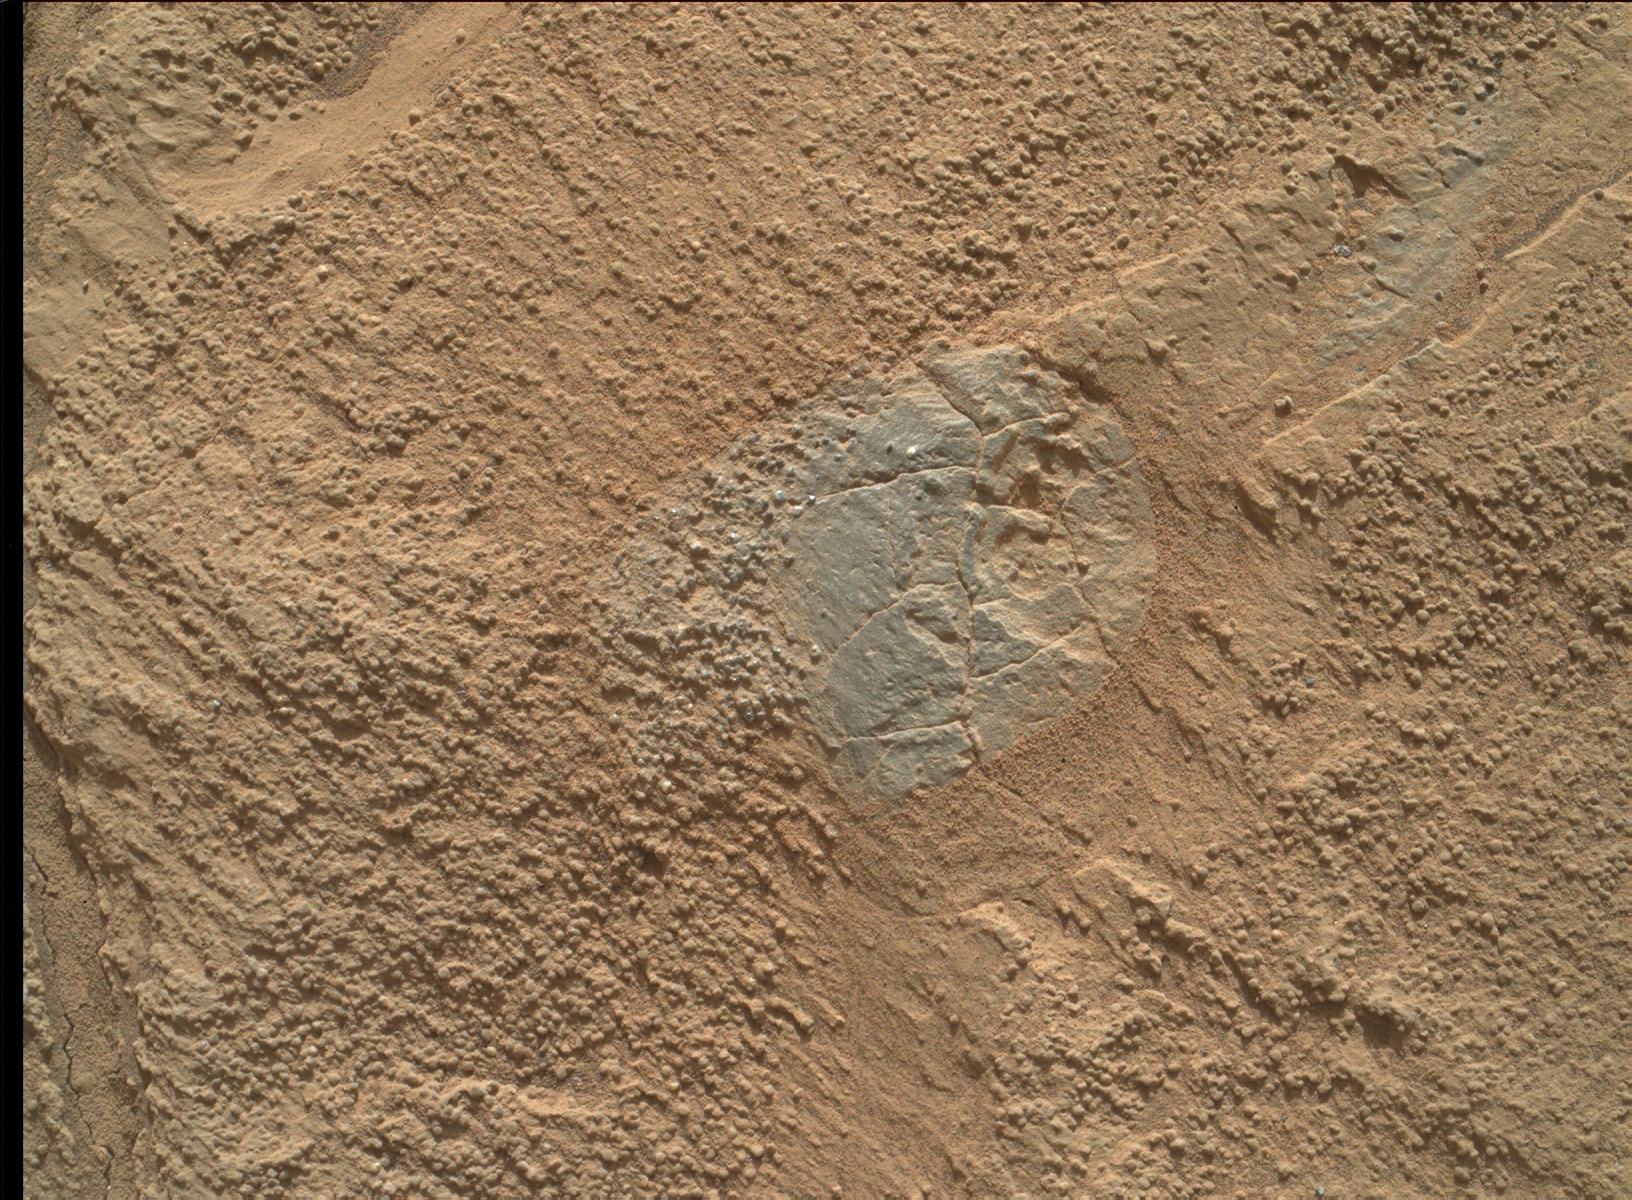 Nasa's Mars rover Curiosity acquired this image using its Mars Hand Lens Imager (MAHLI) on Sol 1341